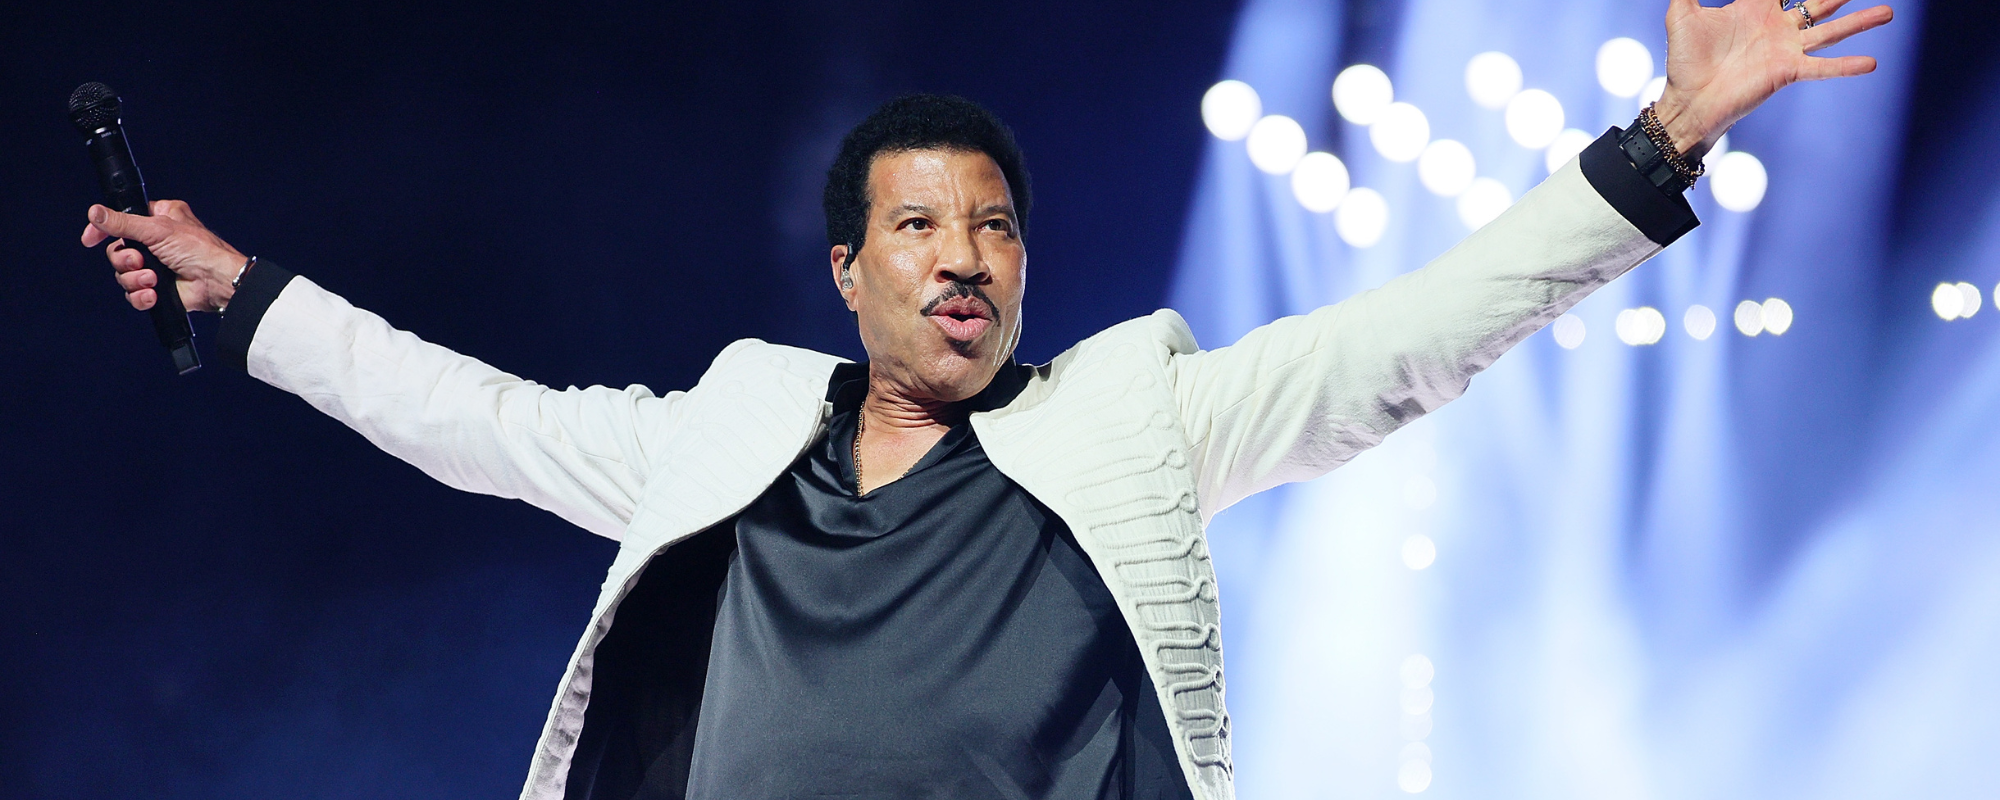 Lionel Richie and Earth, Wind & Fire 2024 Sing a Song All Night Long Tour: How To Buy Tickets